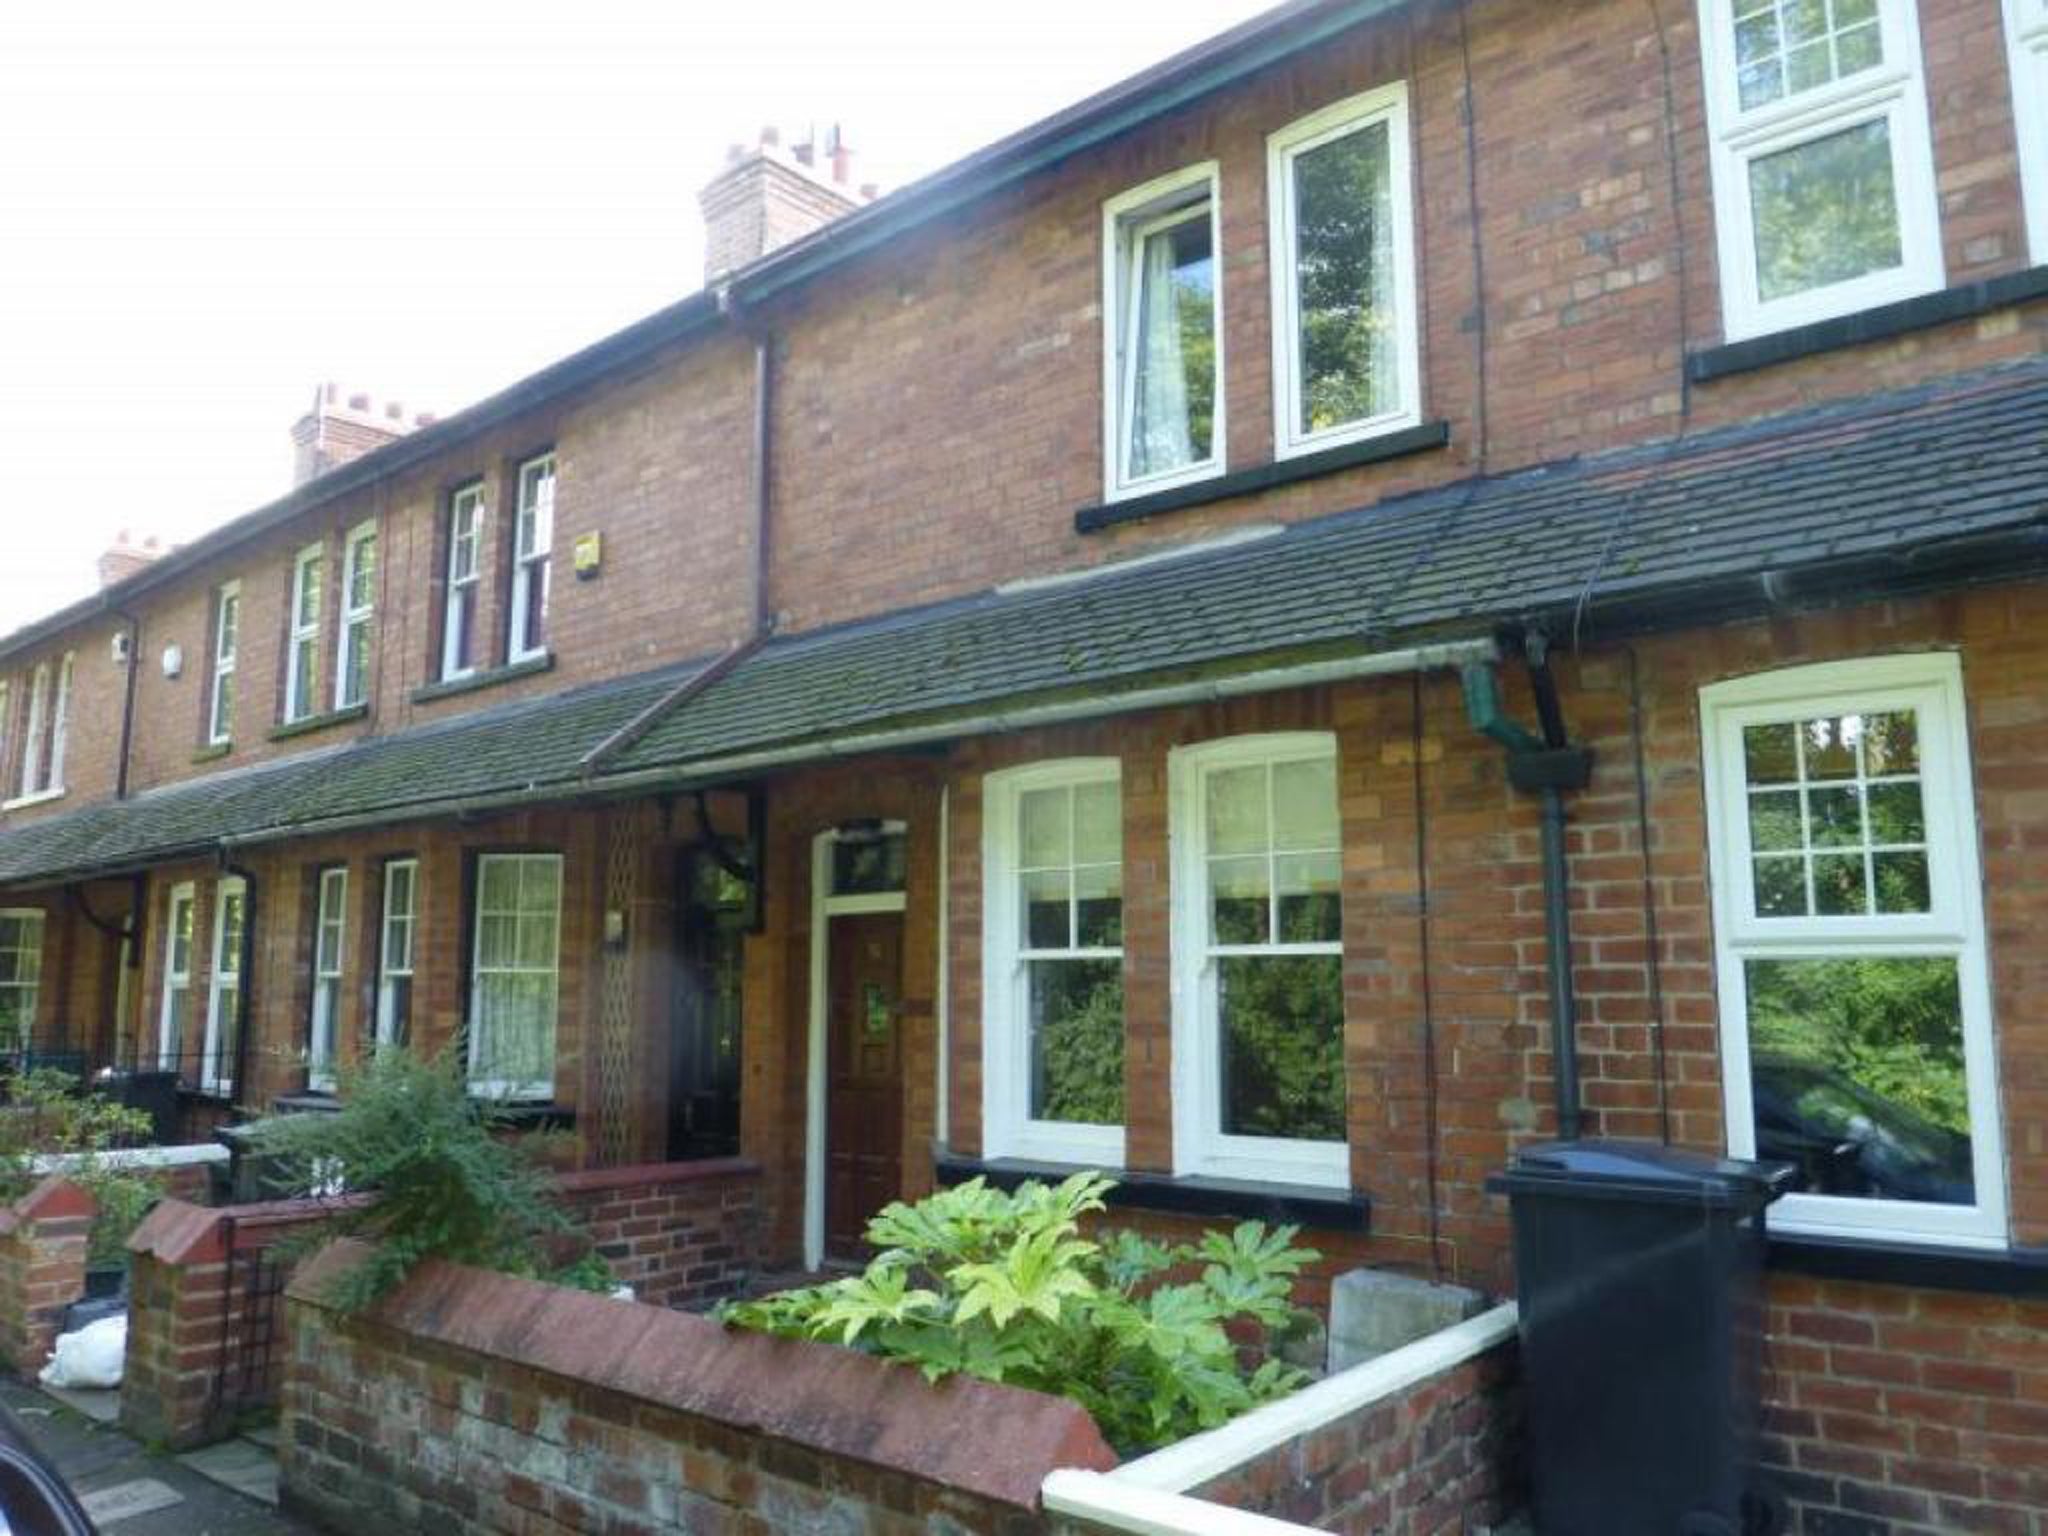 A 3 bedroom property for sale in Hambleton Terrace, York with Reeds Rains. Offers over £200,000.